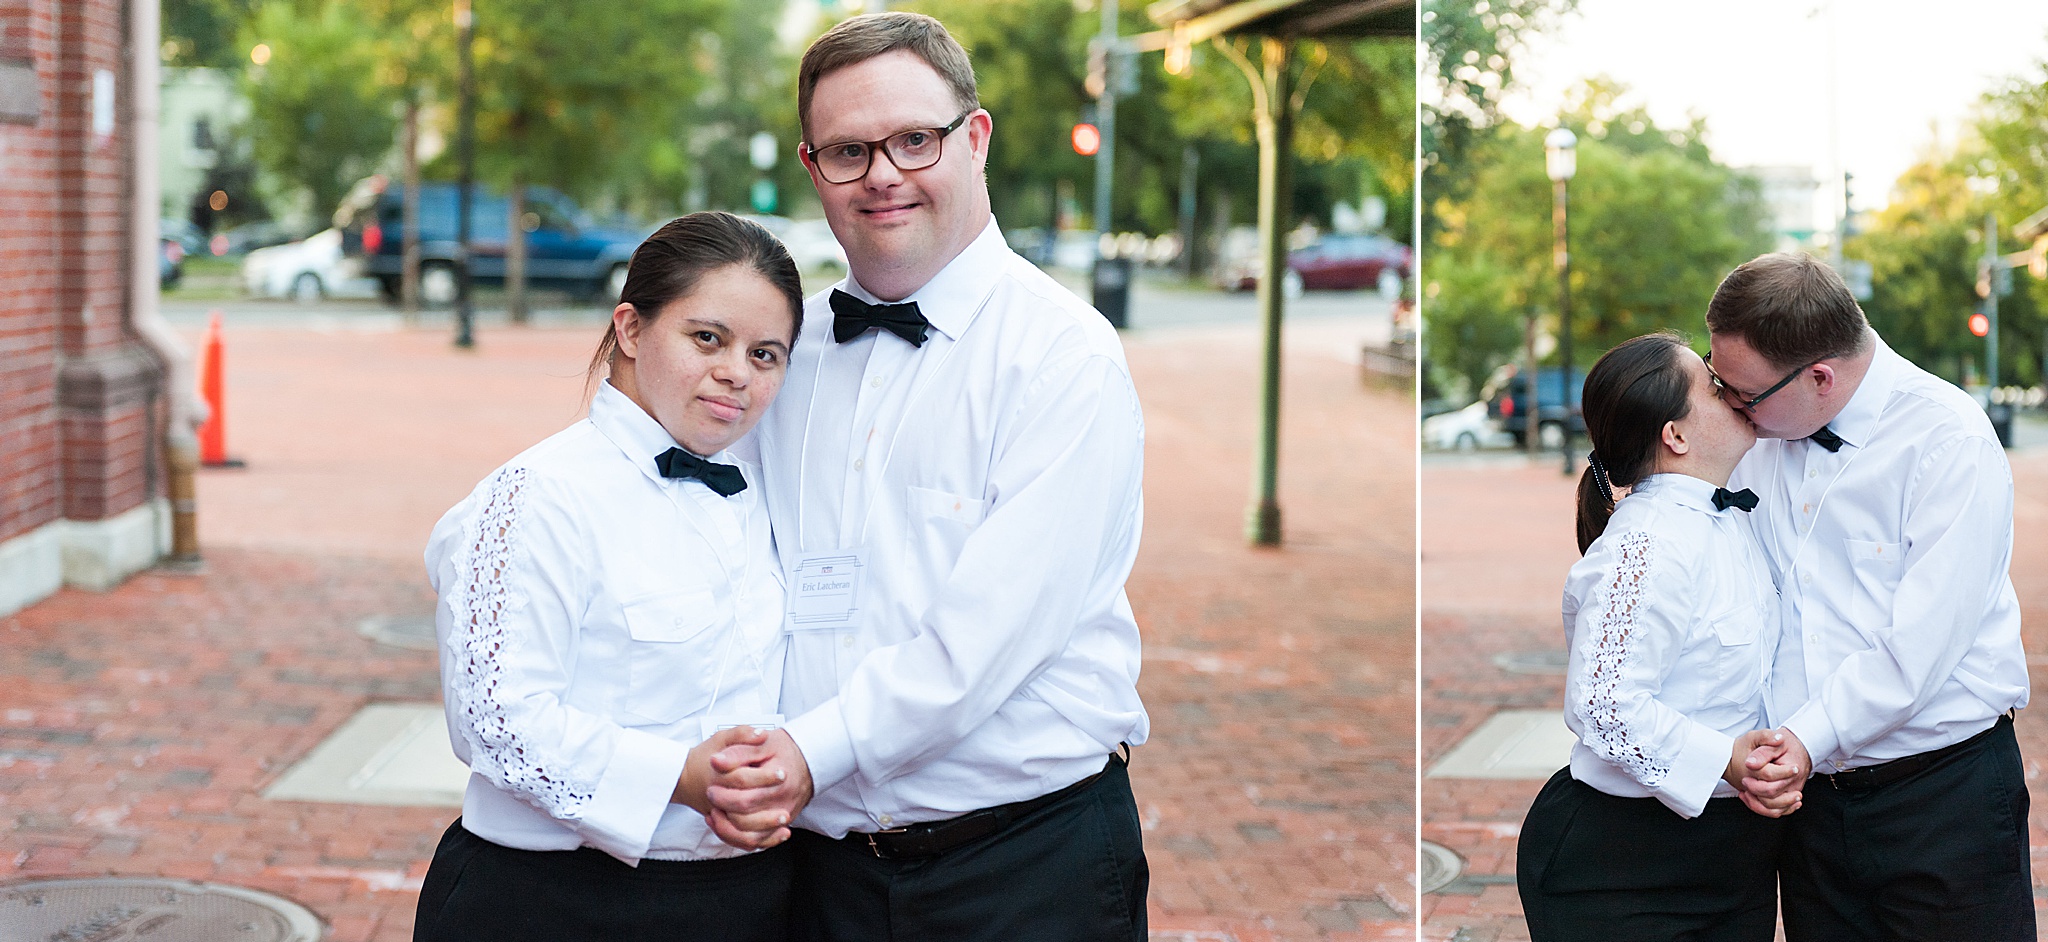 Wendy Zook Photography | National Down Syndrome Society, Down Syndrome awareness, Down Syndrome advocate, DS advocate, MD Down Syndrome advocate, Down Syndrome Photographer, DS photographer, Down Syndrome photography, NDSS, Caring with Congress 2019